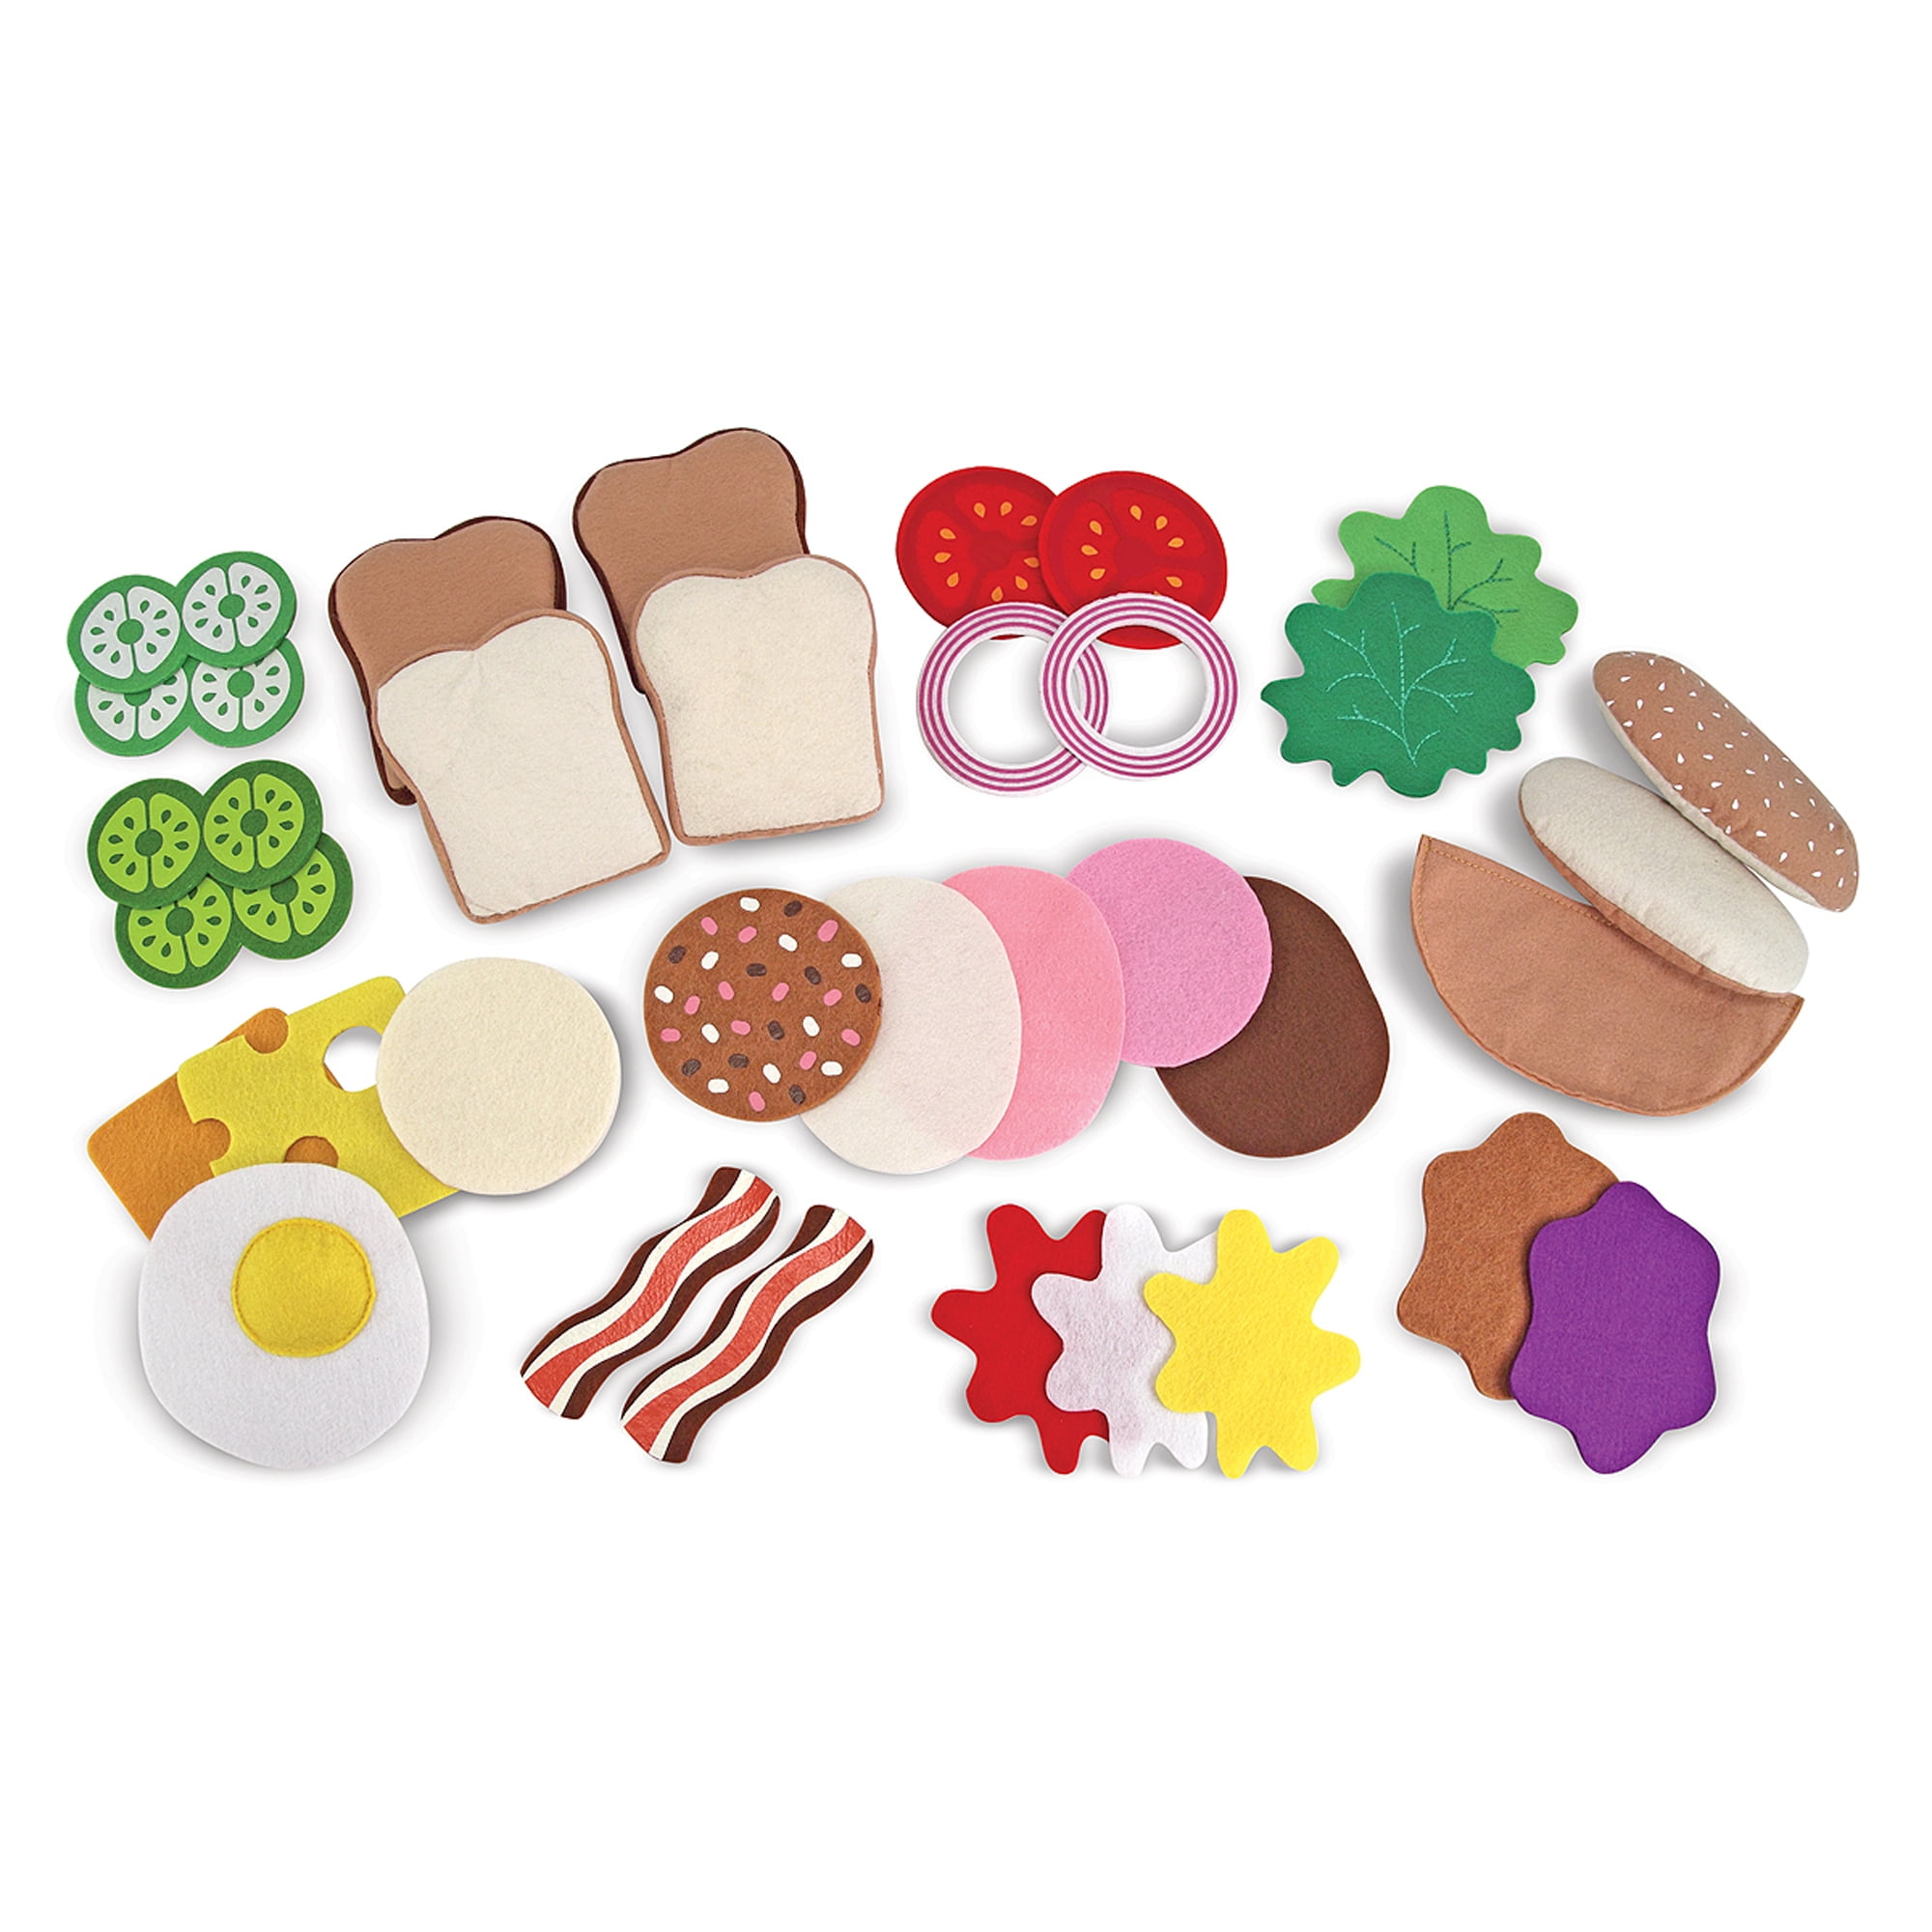 FELT FOOD GRILLED CHEESE  PLAY SET NEW 